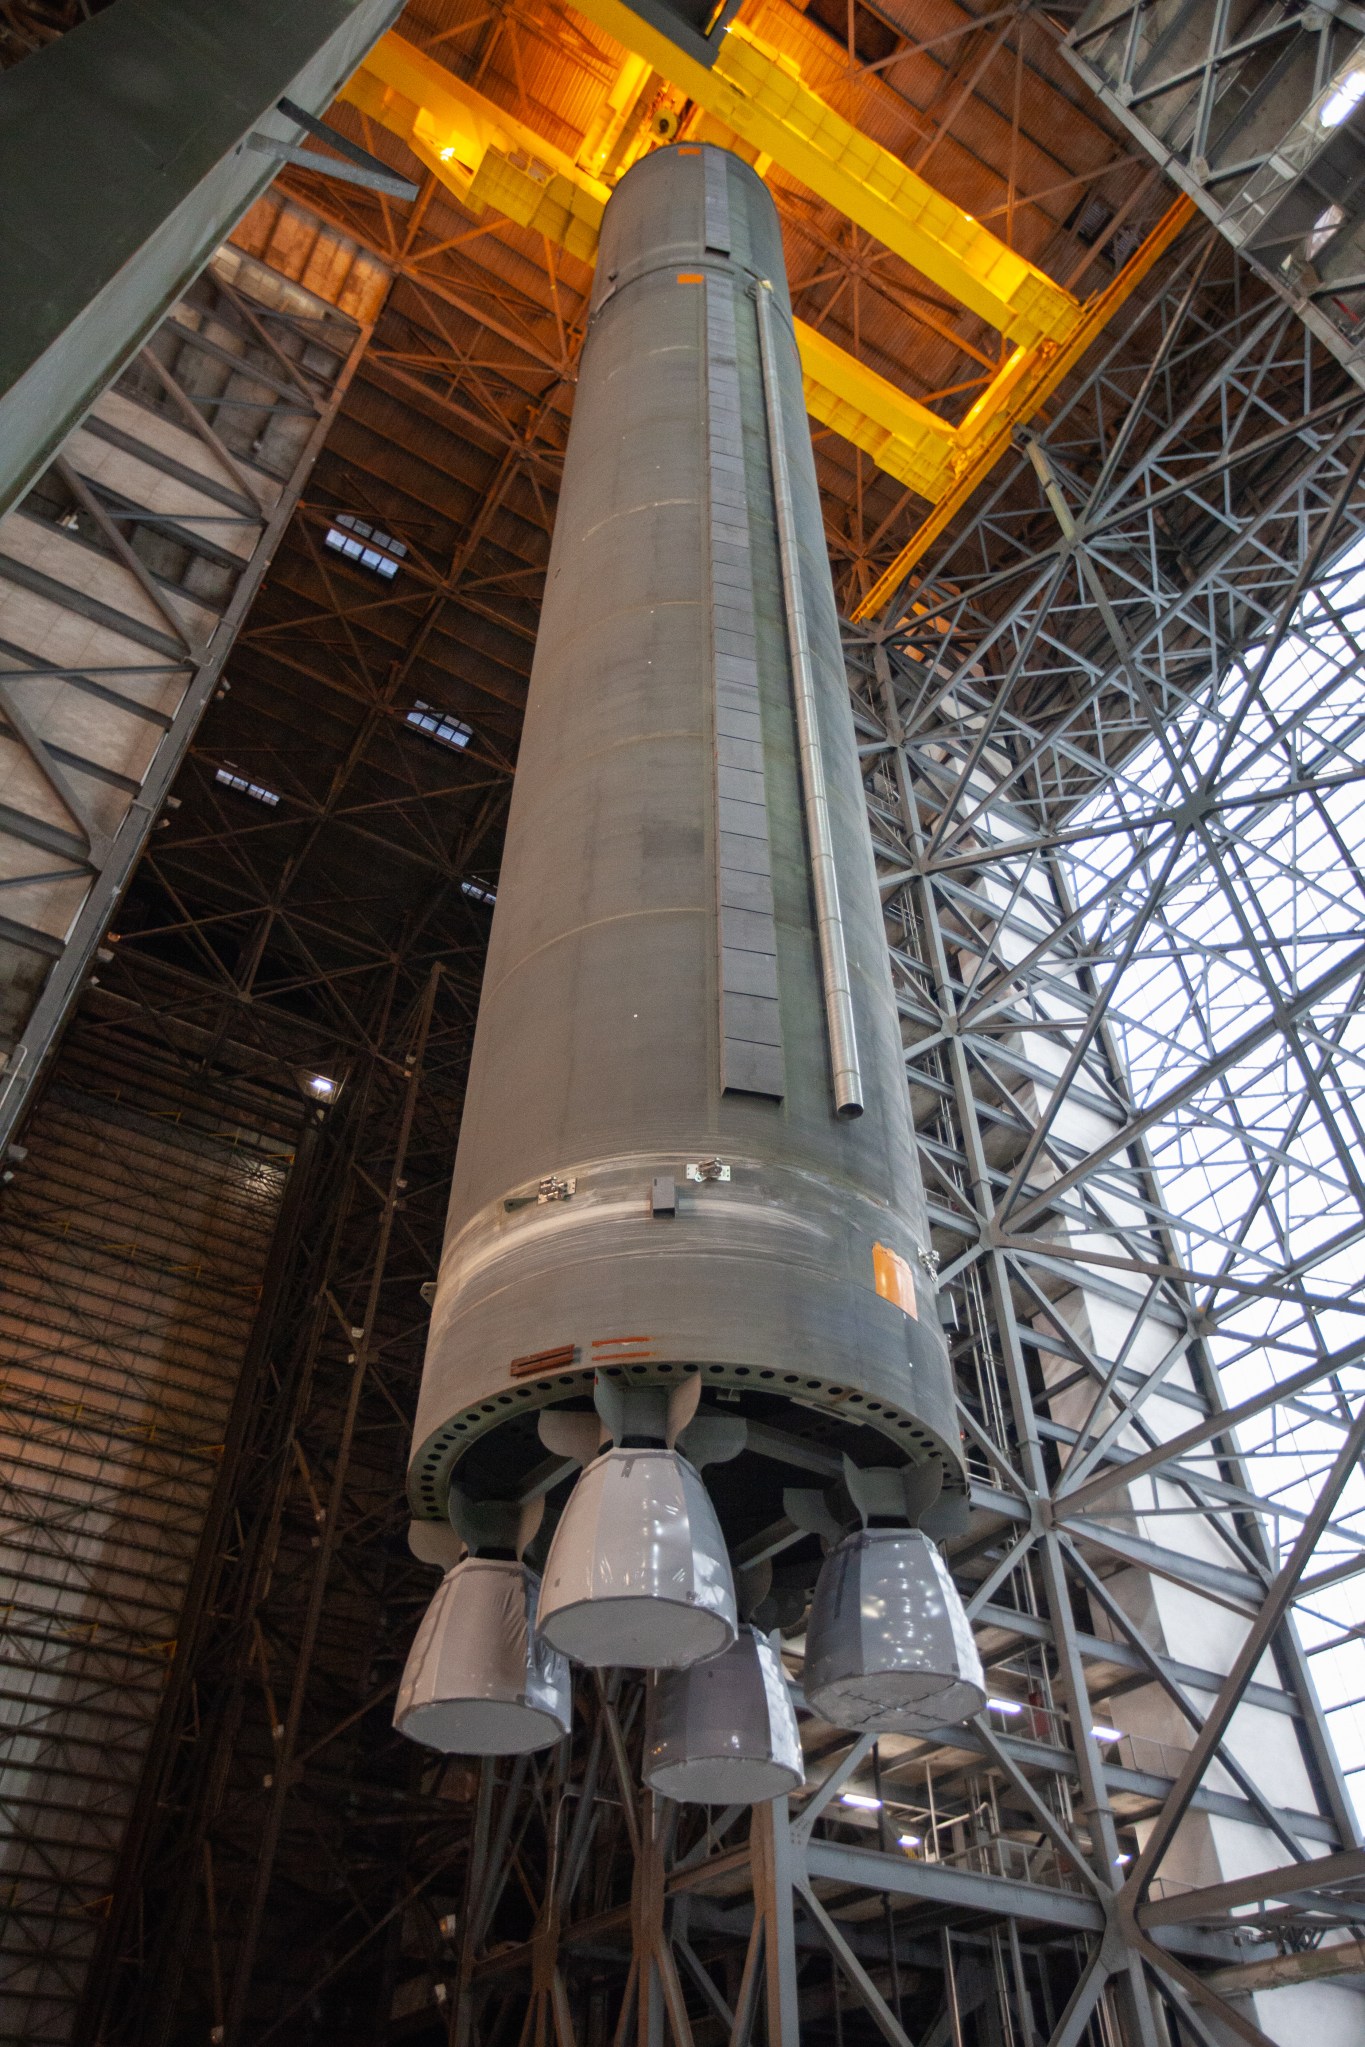 Inside the VAB at the Kennedy Space Center, a crane lifts the Space Launch System Core Stage pathfinder on Oct. 16, 2019.